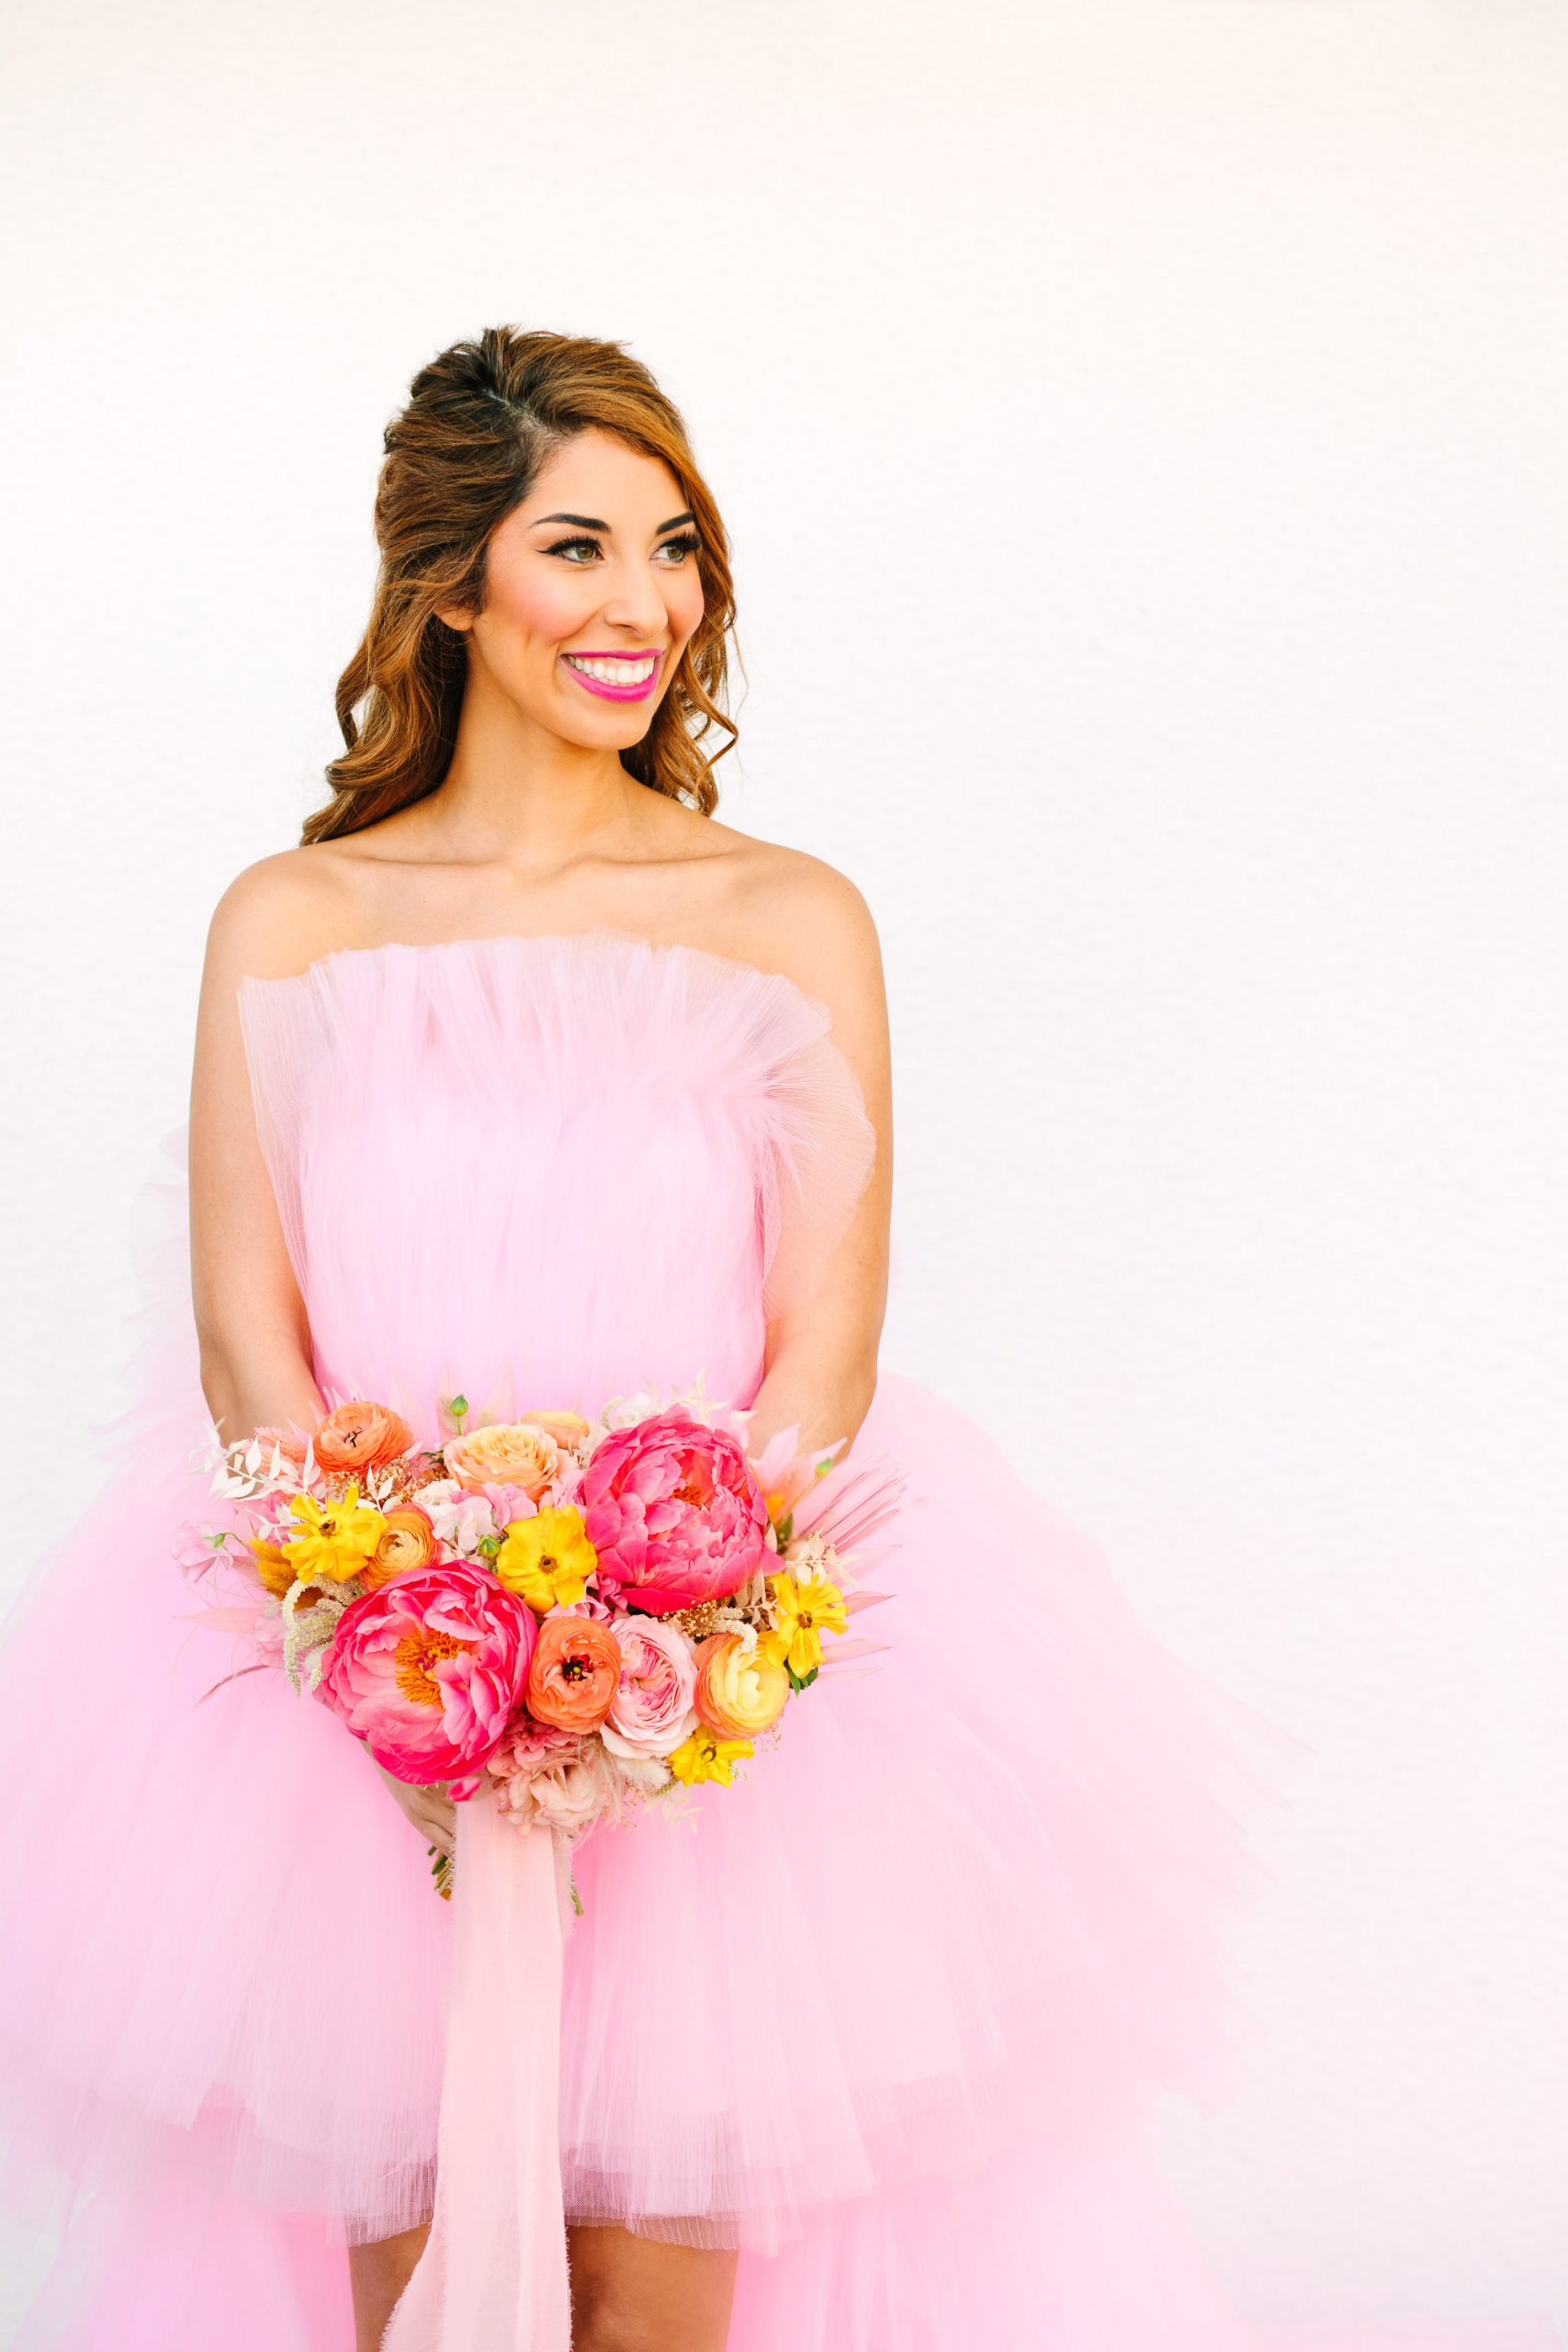 Bride in pink tulle high low gown with pink and yellow bouquet | Pink wedding dress Palm Springs elopement featured on Green Wedding Shoes | Colorful mid-century modern wedding with Saguaro Hotel backdrop | Vibrant and elevated wedding photos for fun-loving couples in Southern California #palmspringswedding #palmspringselopement #pinkwedding #greenweddingshoes Source: Mary Costa Photography | Los Angeles